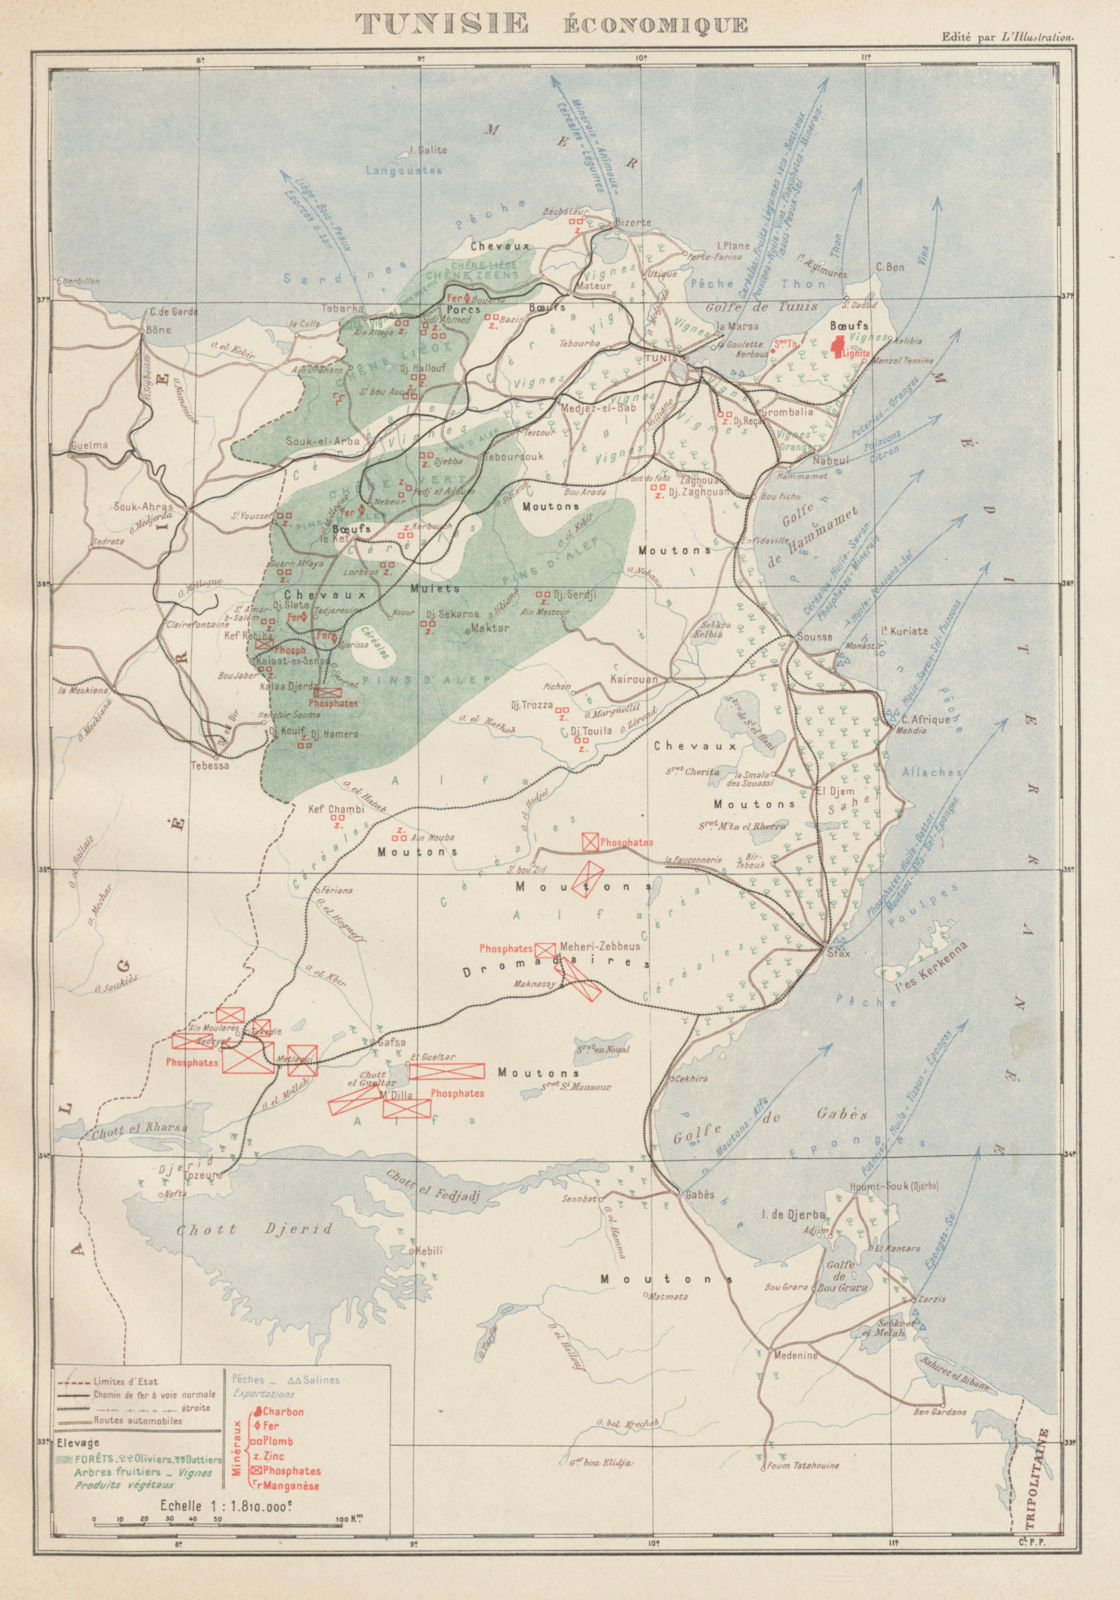 Associate Product FRENCH COLONIAL TUNISIA RESOURCES. Tunisie. Economique Economic 1929 old map